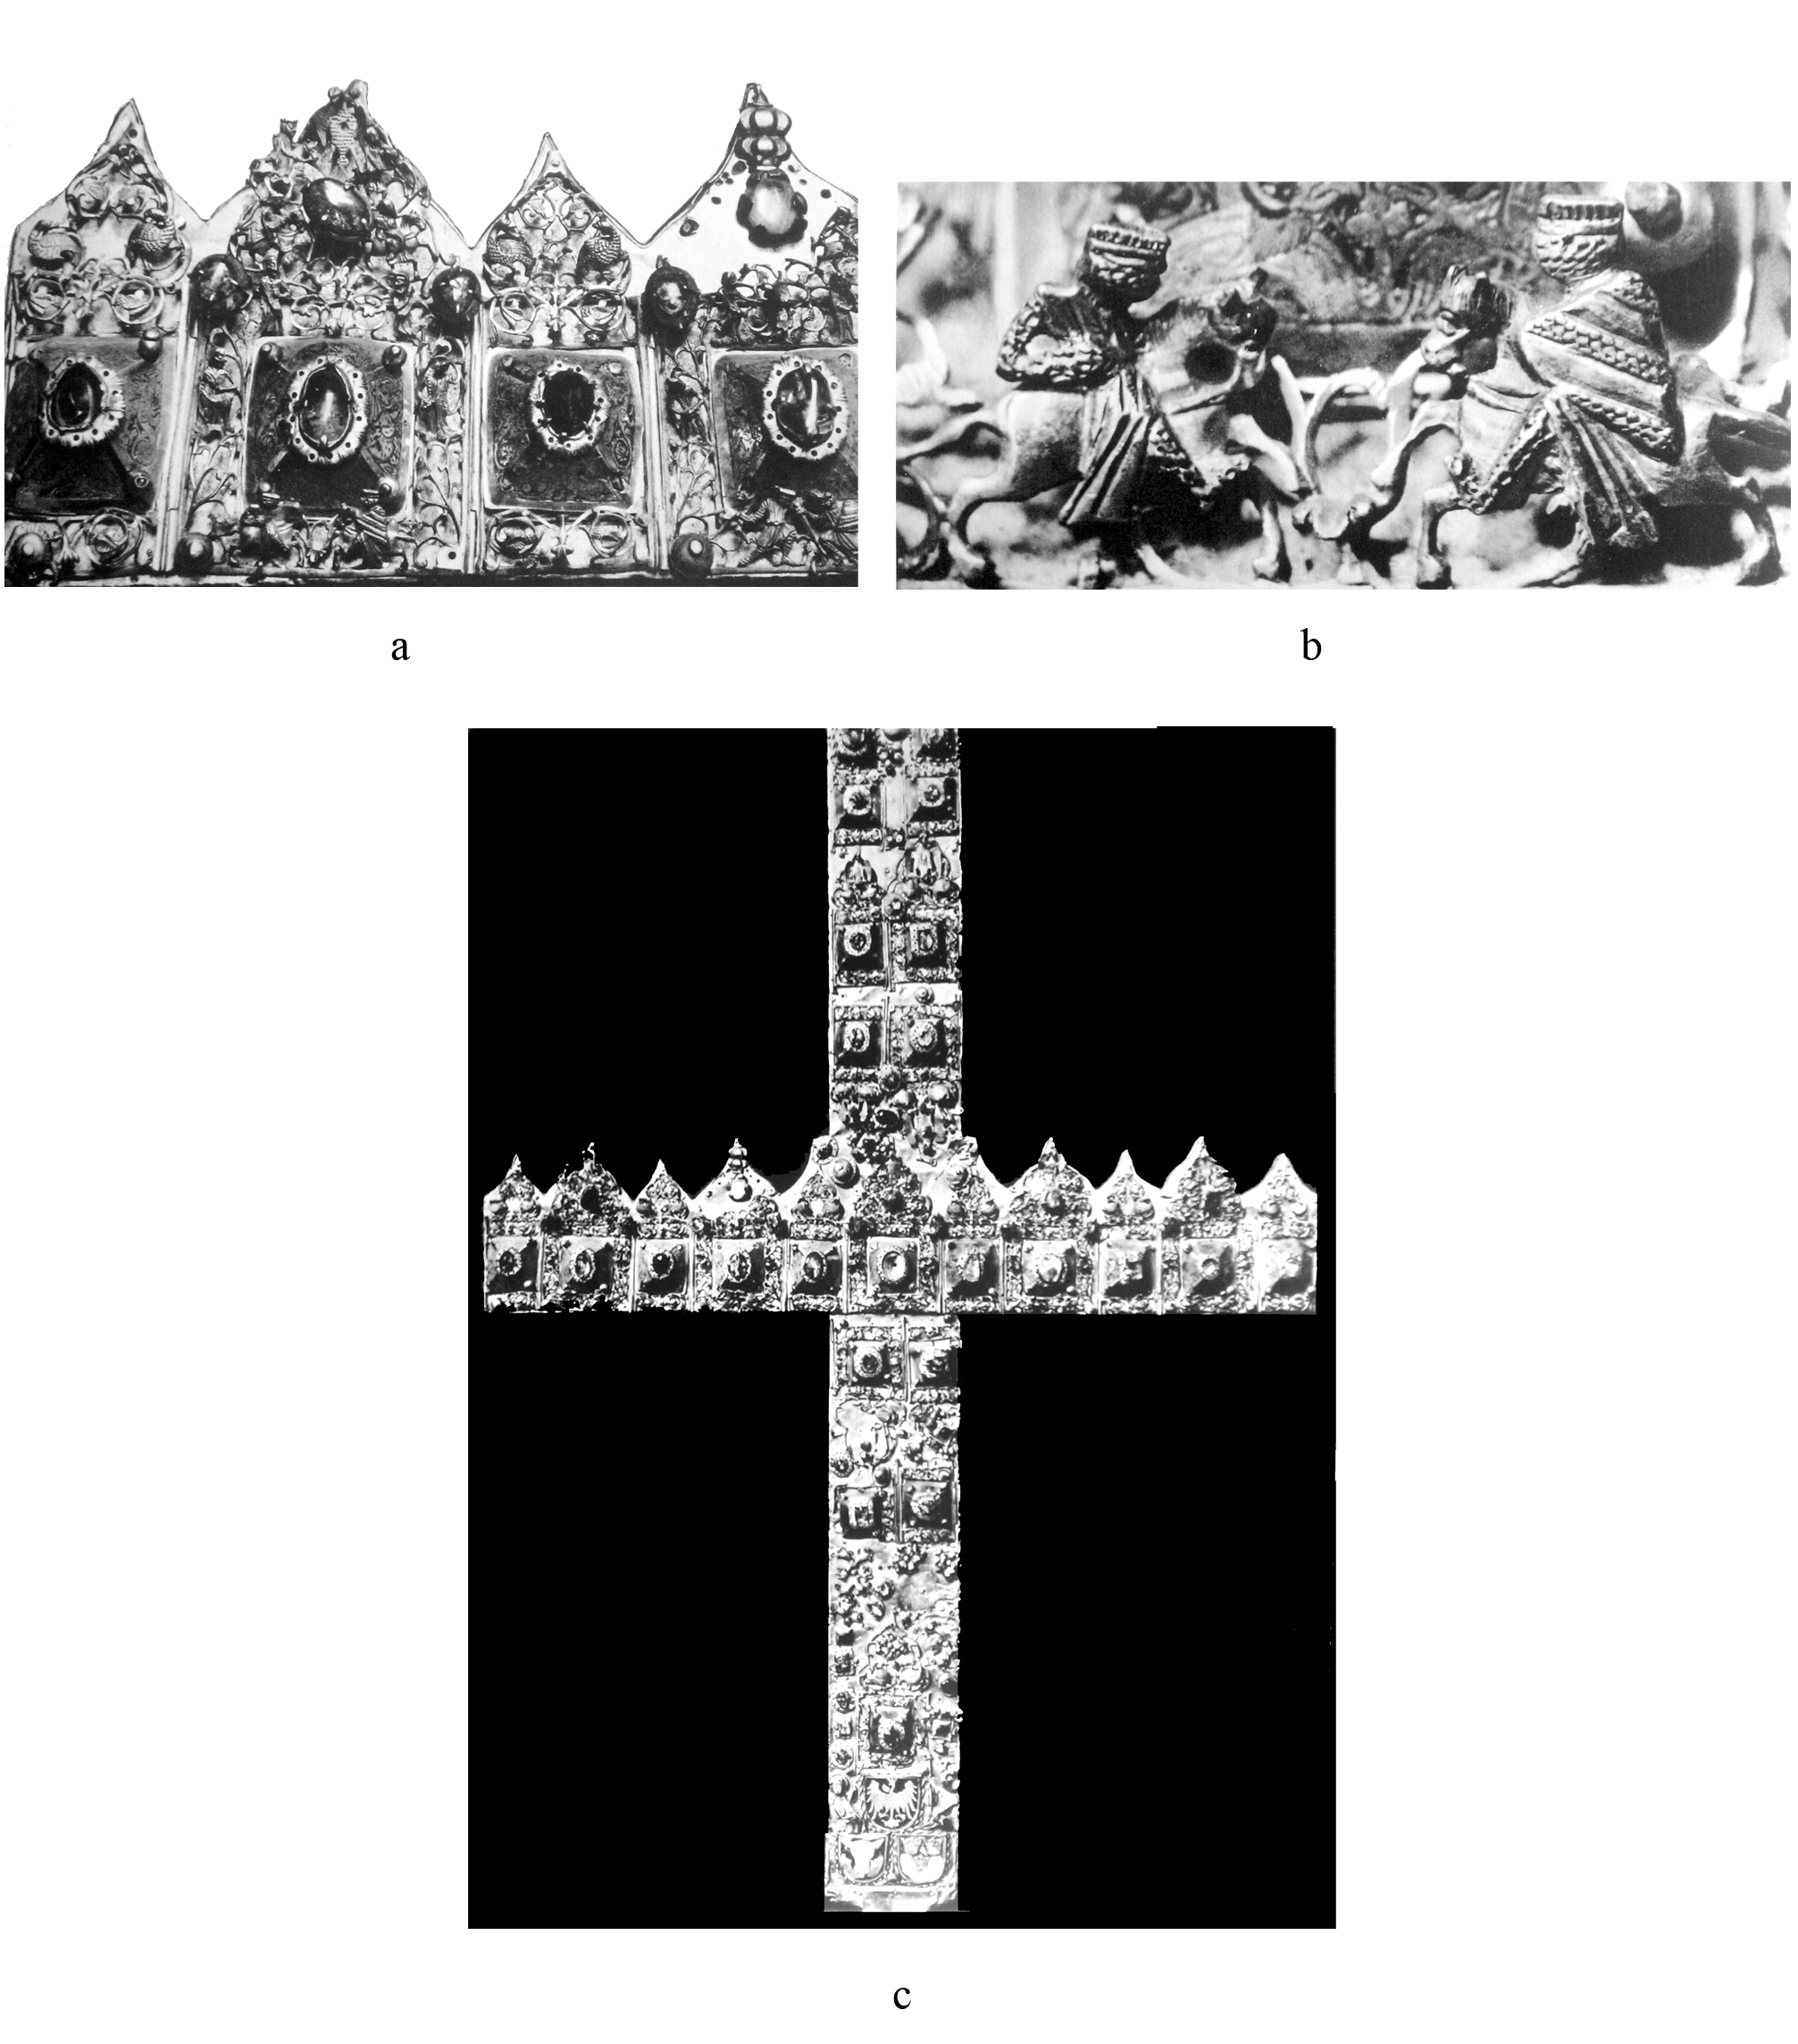 Fig. 20. Cross made of diadems, 13th century, the treasury of Krakow Cathedral. After: Walicki (ed.) 1971, pp. 298–301, figs. 1133–1137.